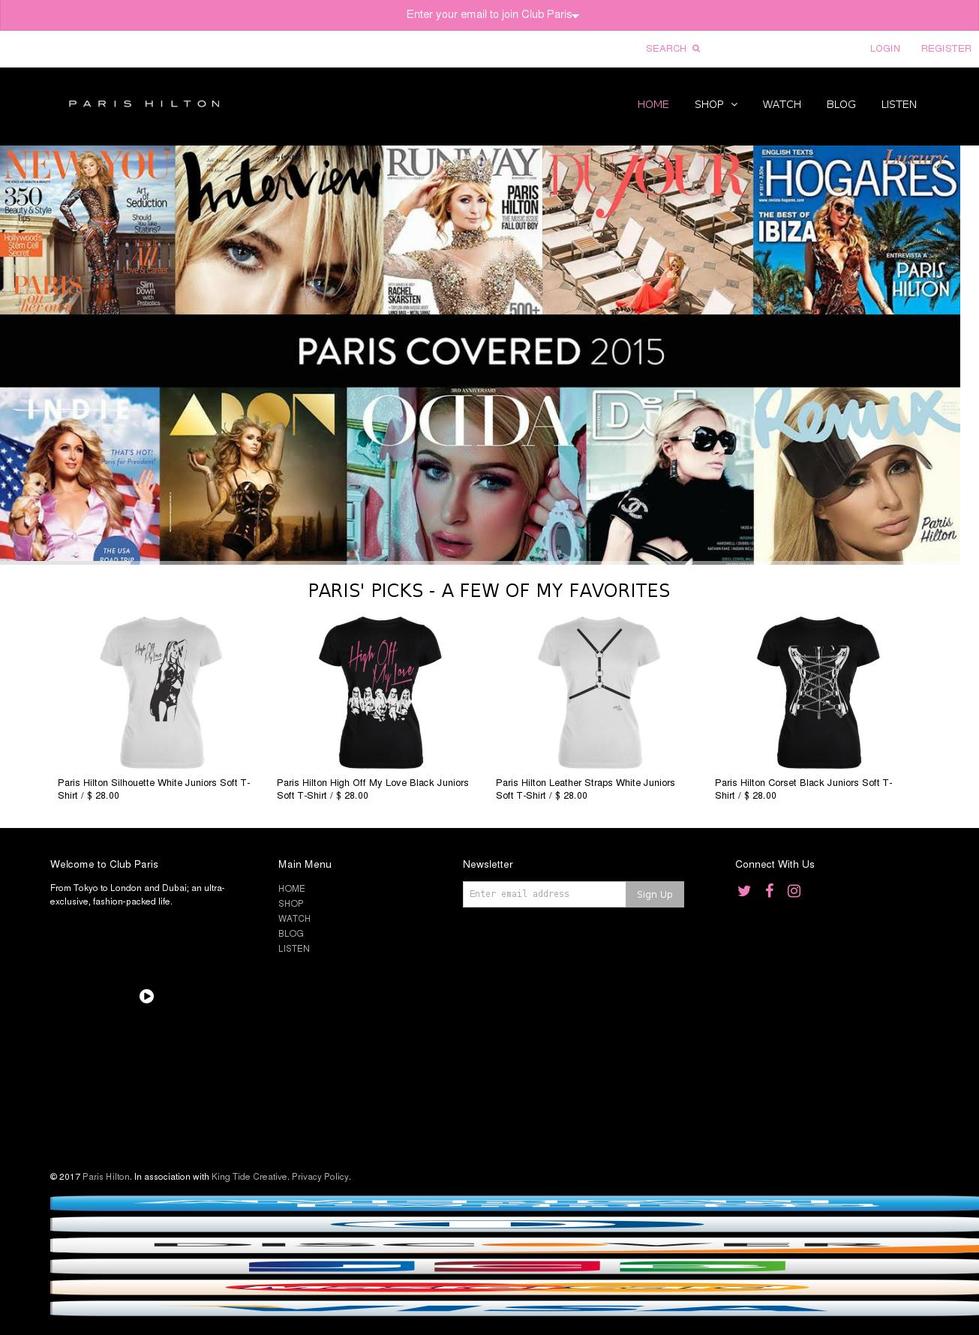 Weekend Shopify theme site example heiressmakeup.com